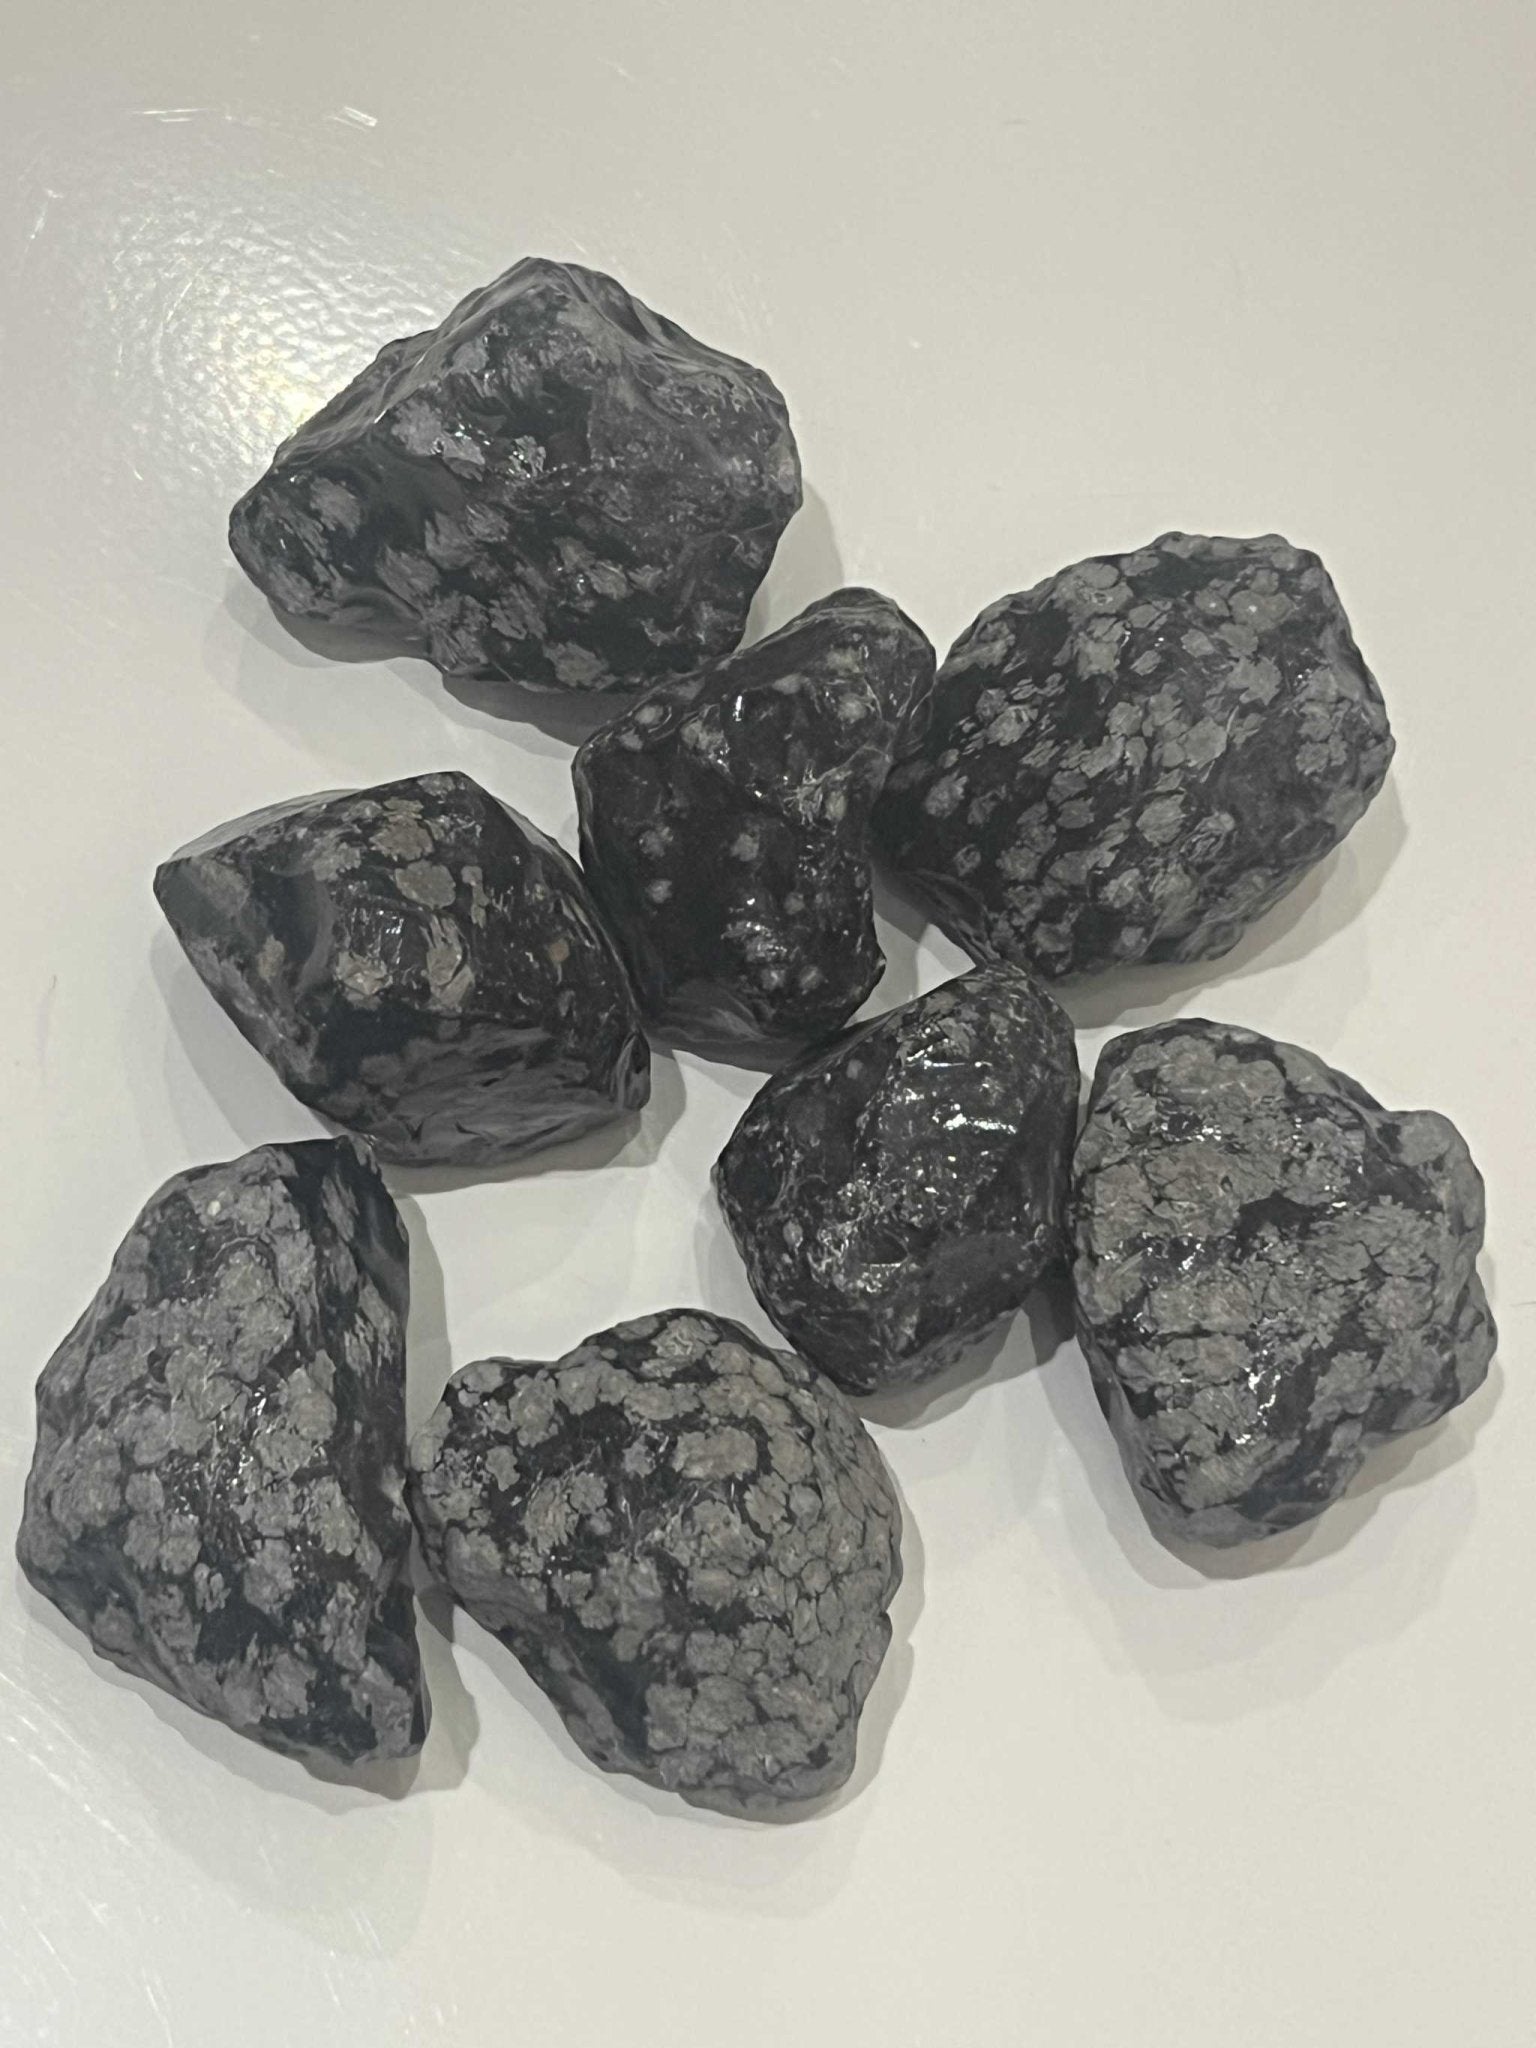 Snowflake Obsidian Rough - Sacred Crystals Rough Stones